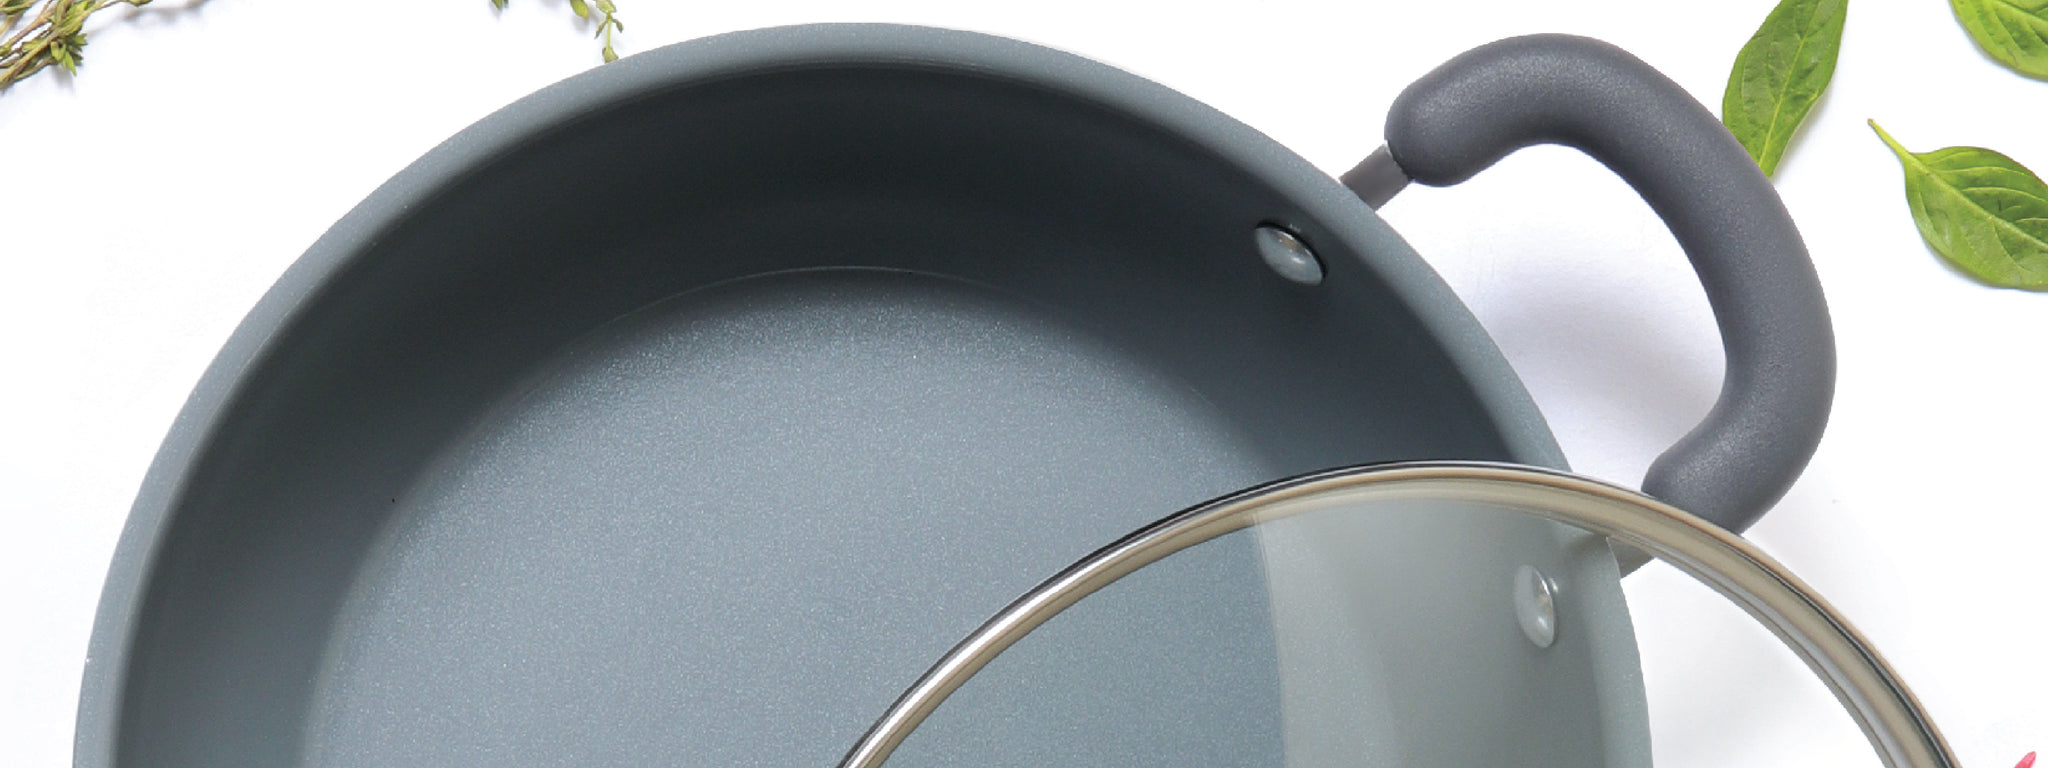 What are the best alternatives To Non-Stick Cookware?